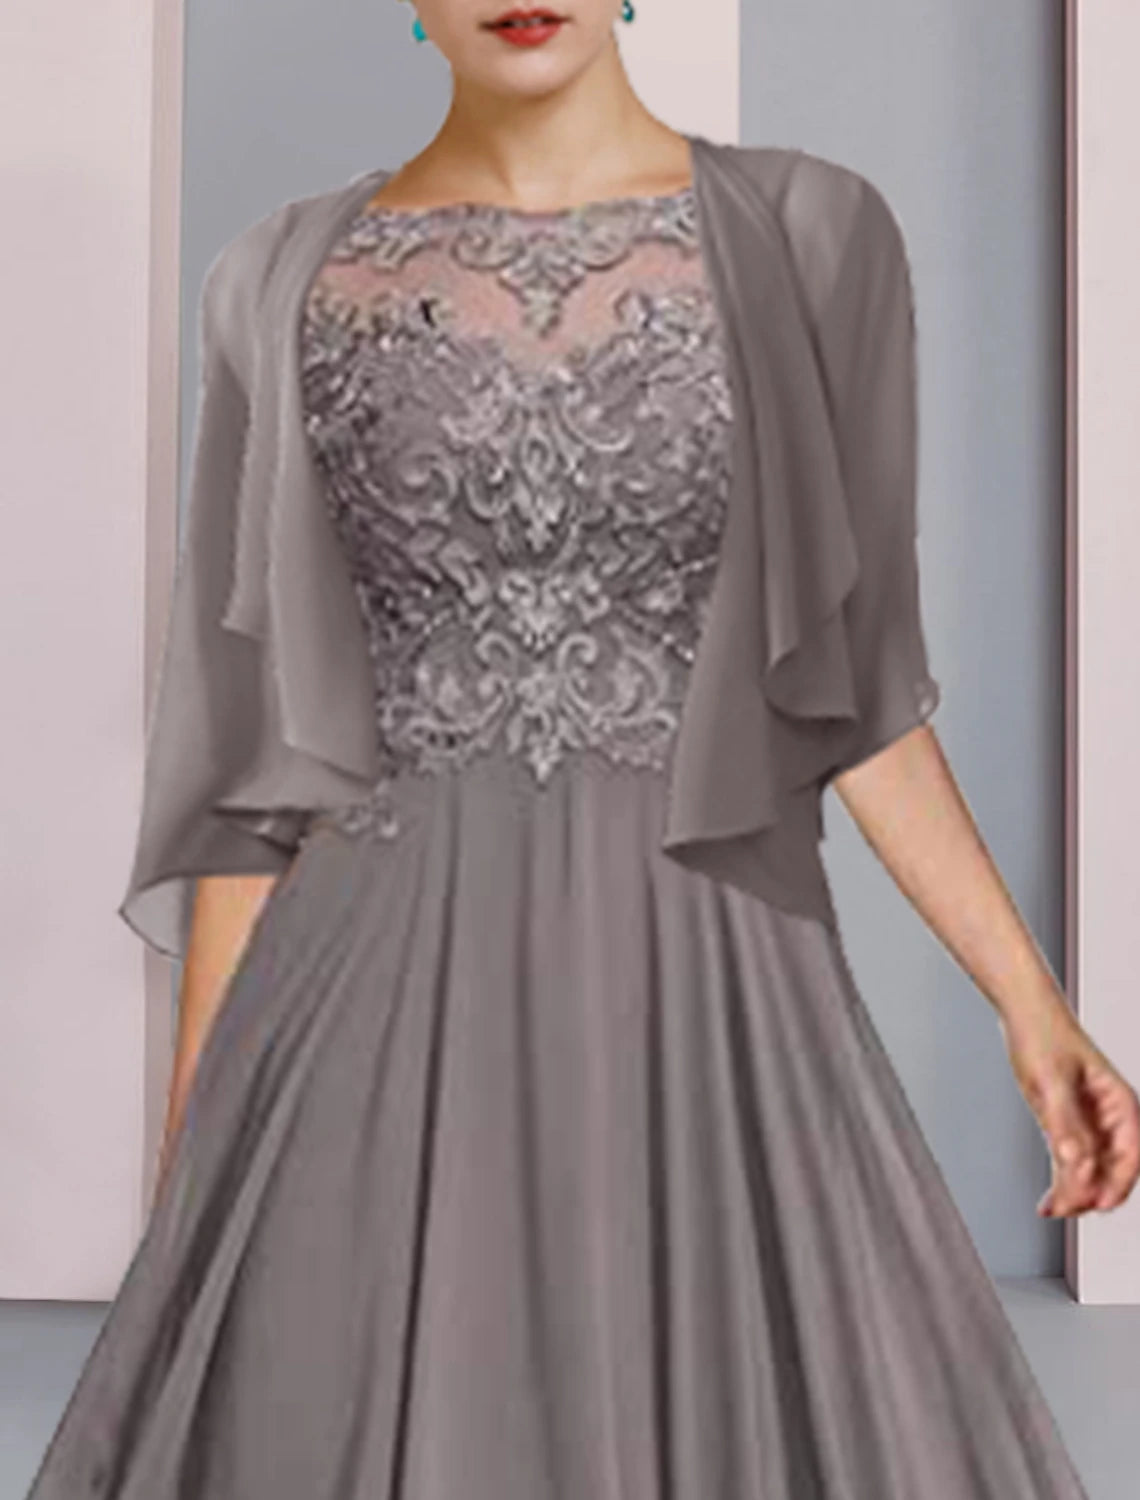 A-Line Mother of the Bride Dress Formal Wedding Guest Elegant Scoop Neck Floor Length Chiffon Lace Half Sleeve Wrap Included with Pleats Beading Appliques